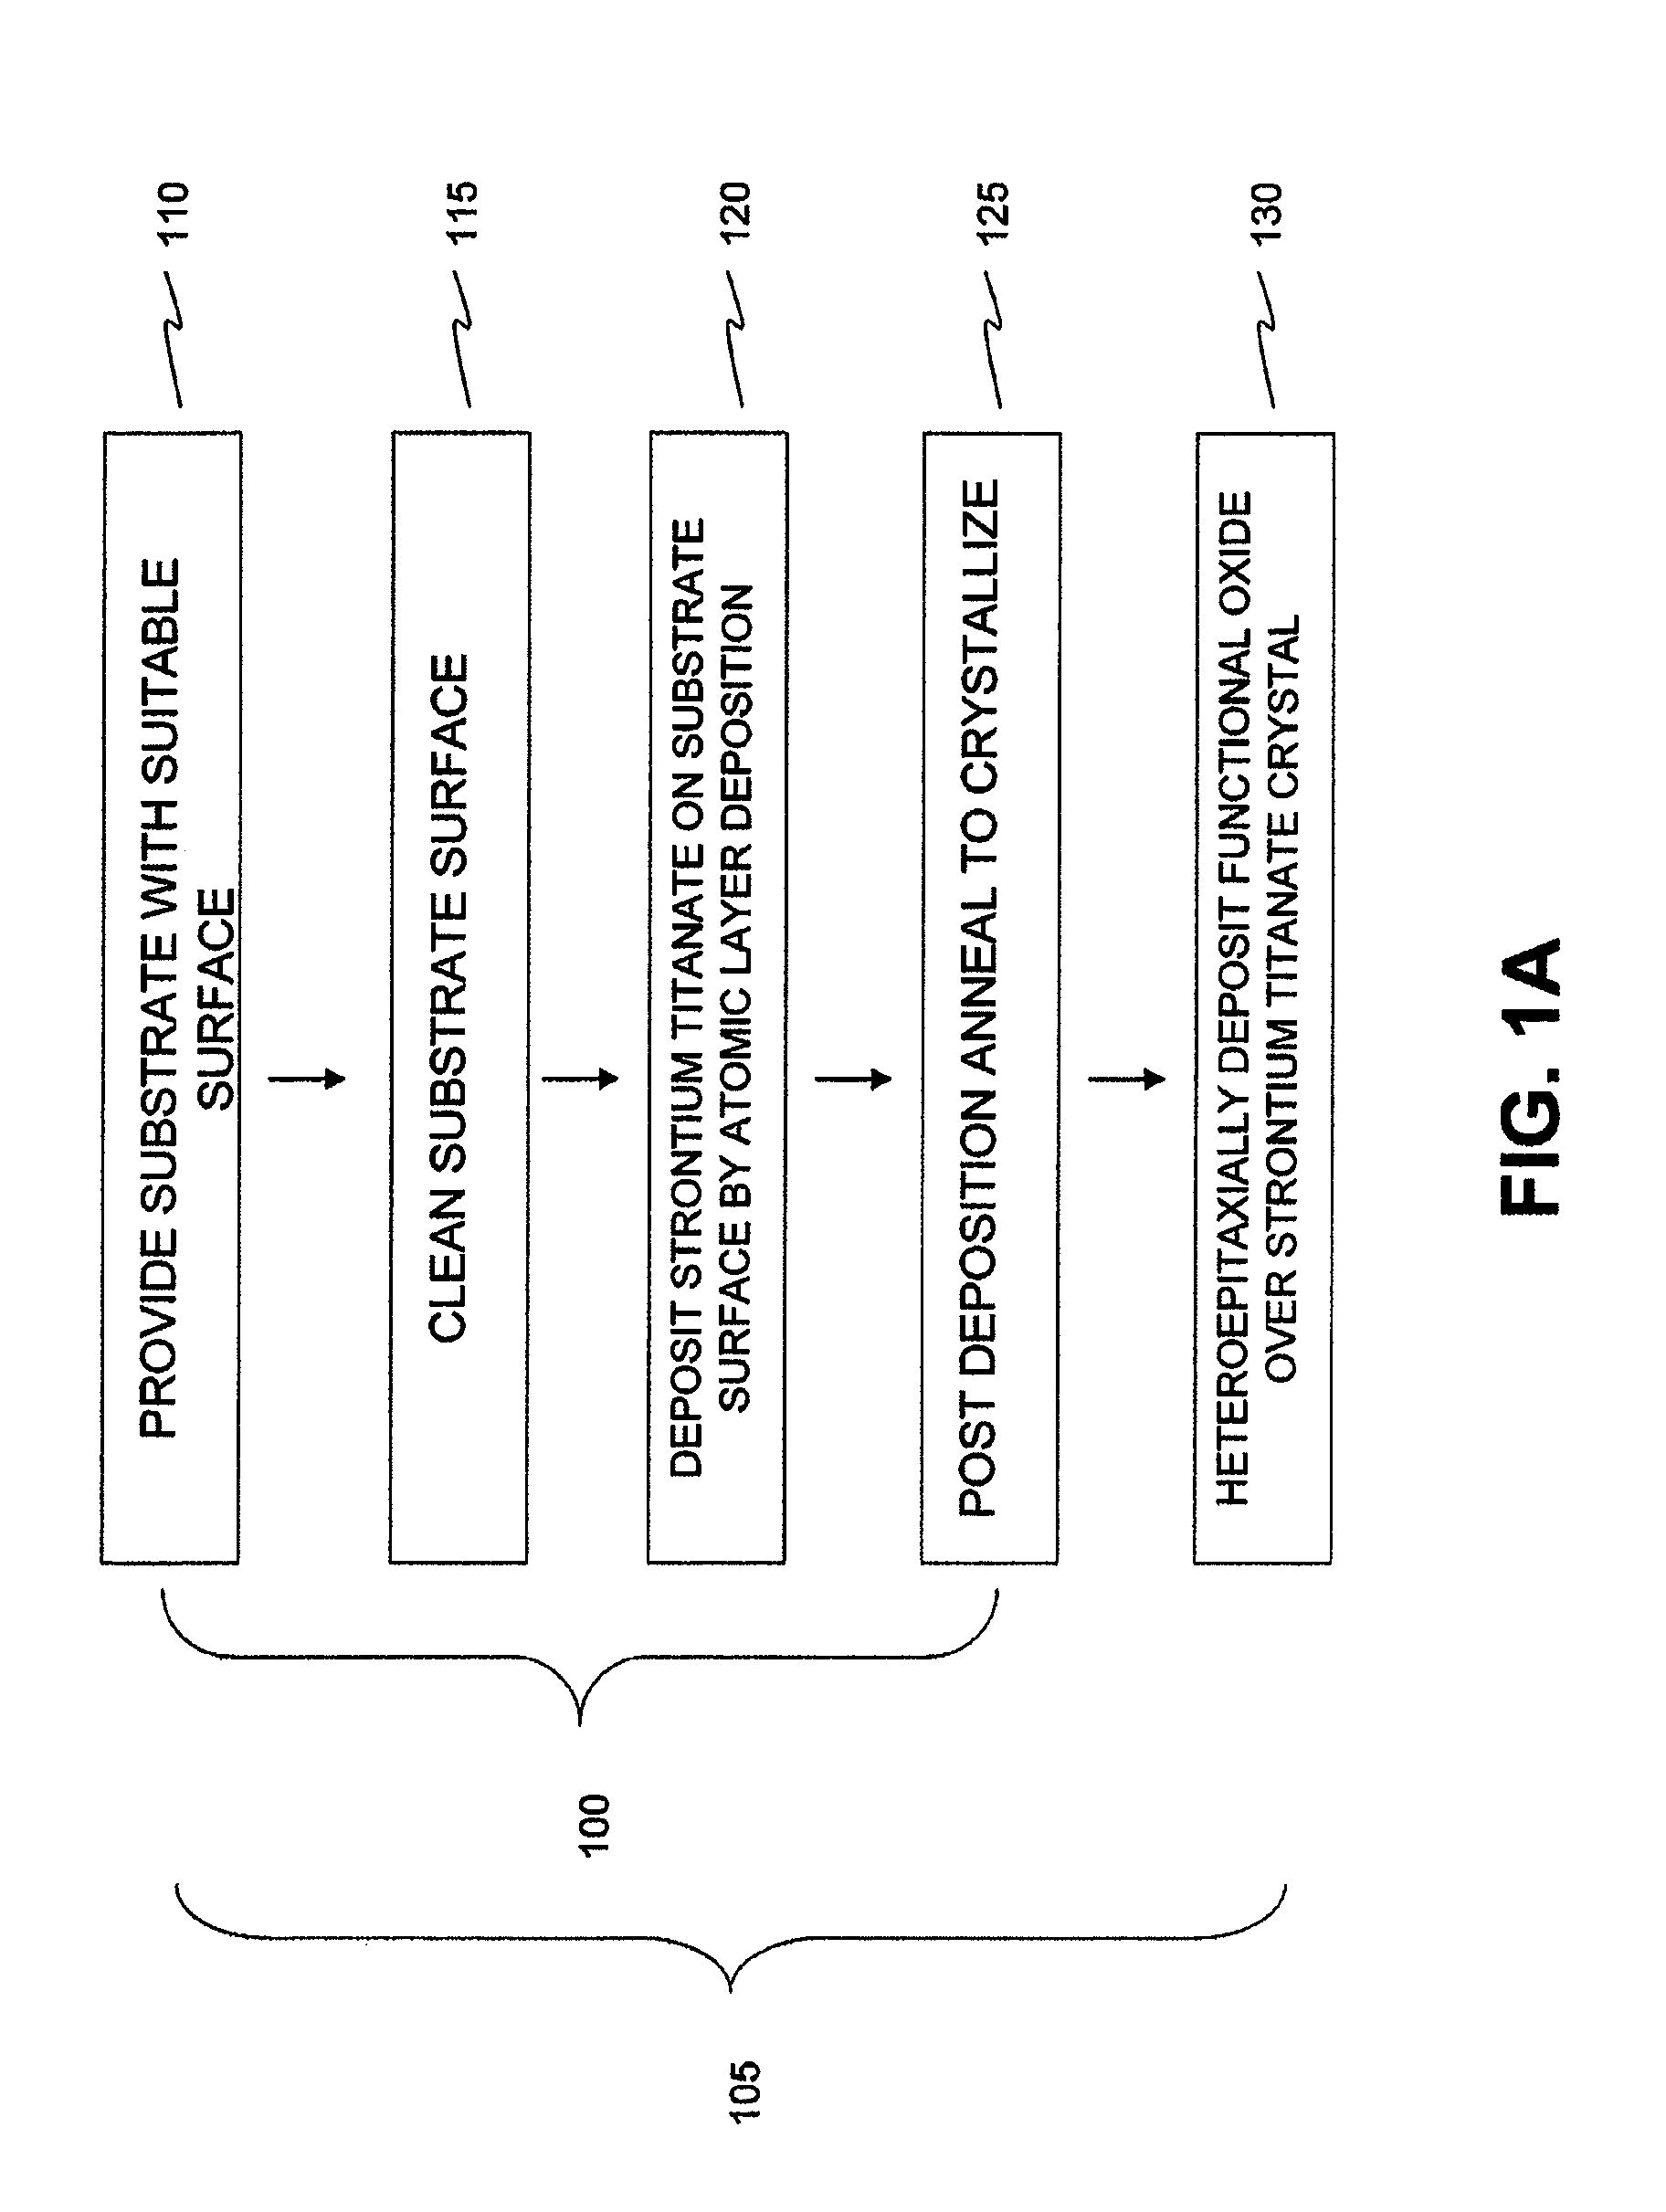 Crystalline strontium titanate and methods of forming the same